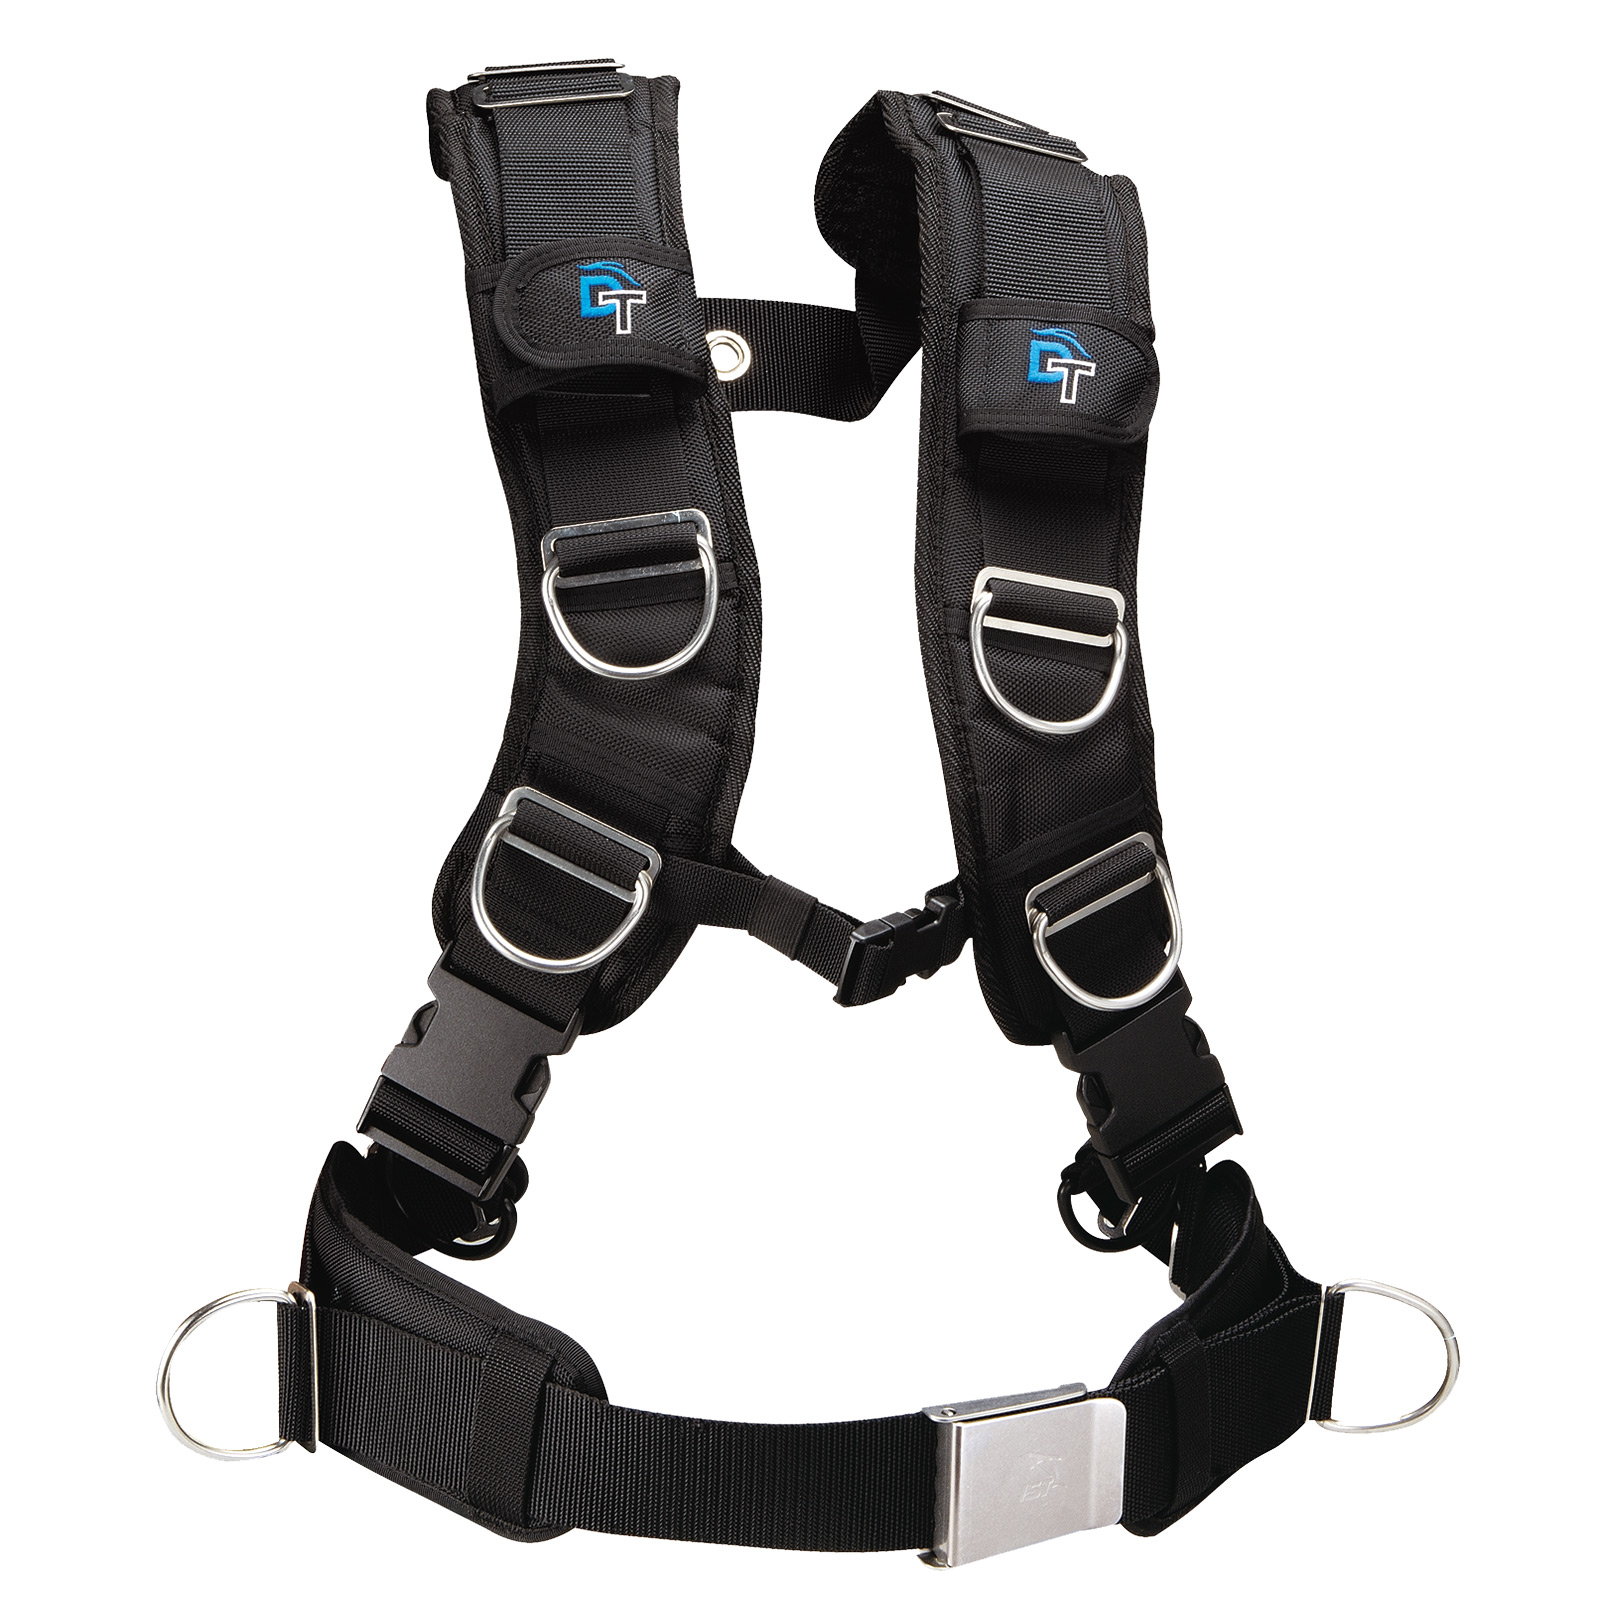 HB-2-L DELUXE HARNESS